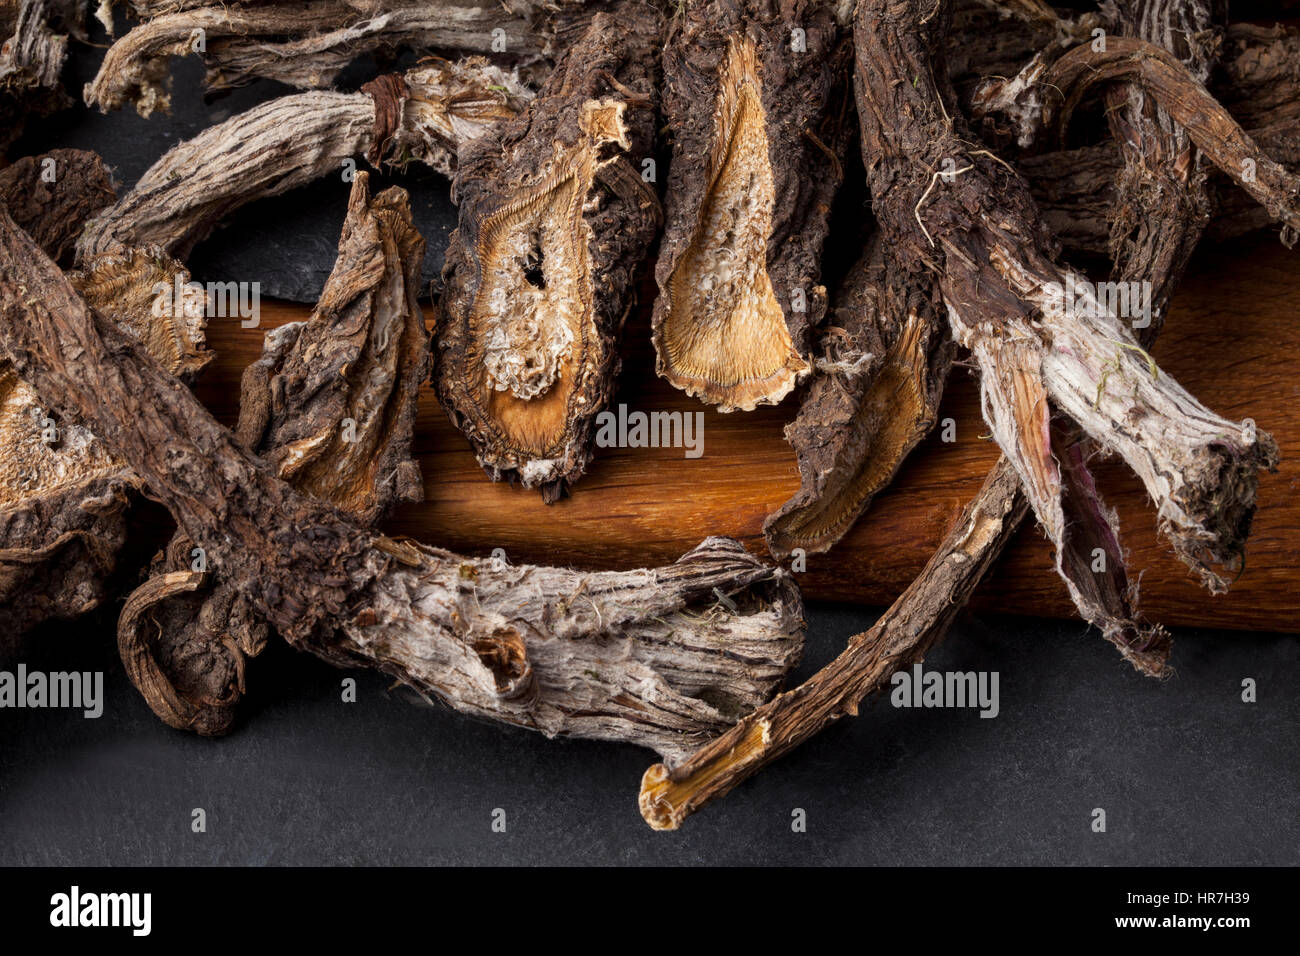 Burdock (Arctium) - medical plant. Dried roots oil are used for the hair treatment and care. Stock Photo